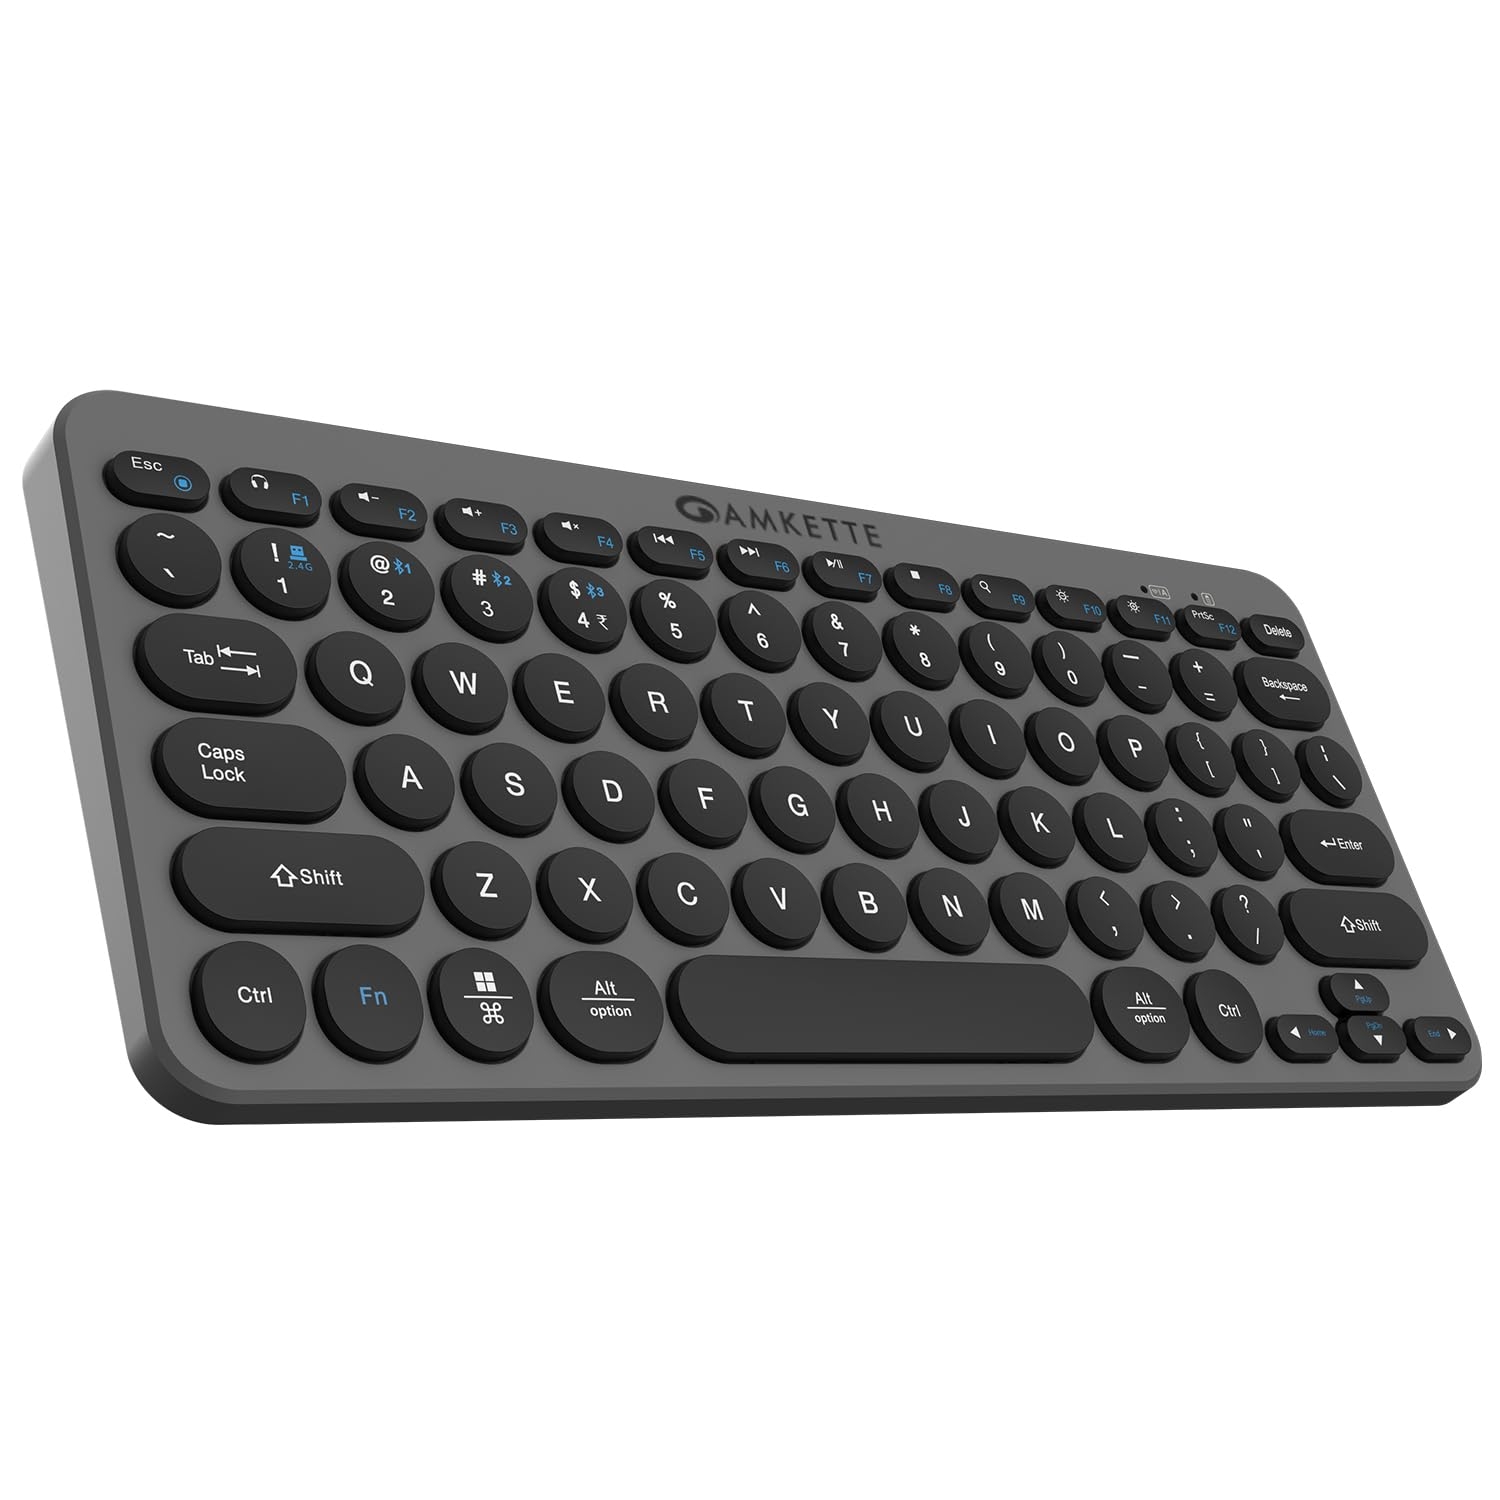 Amkette Optimus Bluetooth 4 in 1 Keyboard with 3 Bluetooth Devices and 1 USB Device Connectivity, Compact & Portable Size with On/Off Switch, Silent Keystrokes, Direct Multimedia Keys